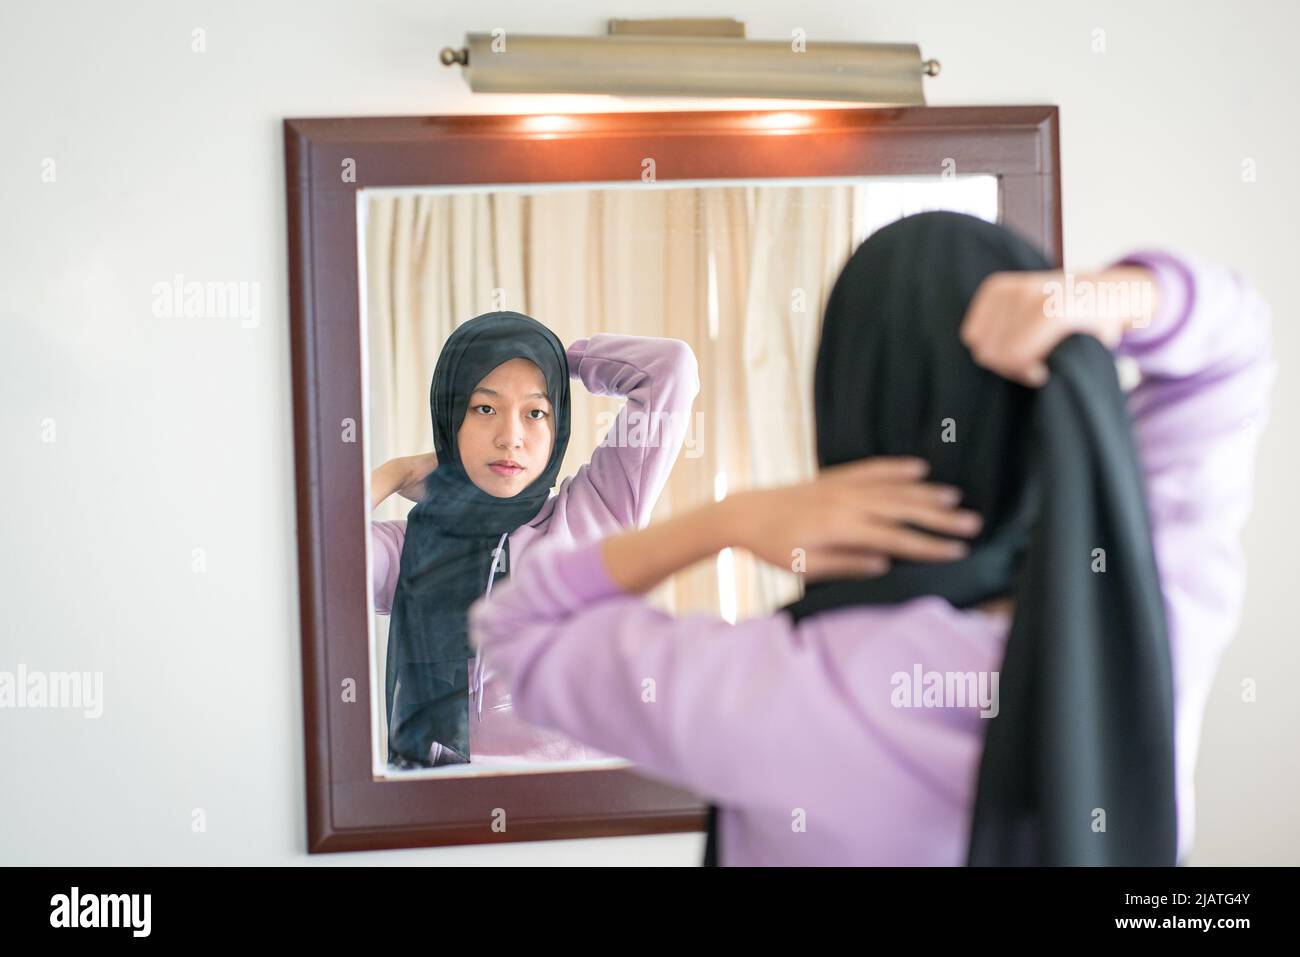 Reflection on a wall mirror of a muslim woman wearing her head scarf. Stock Photo